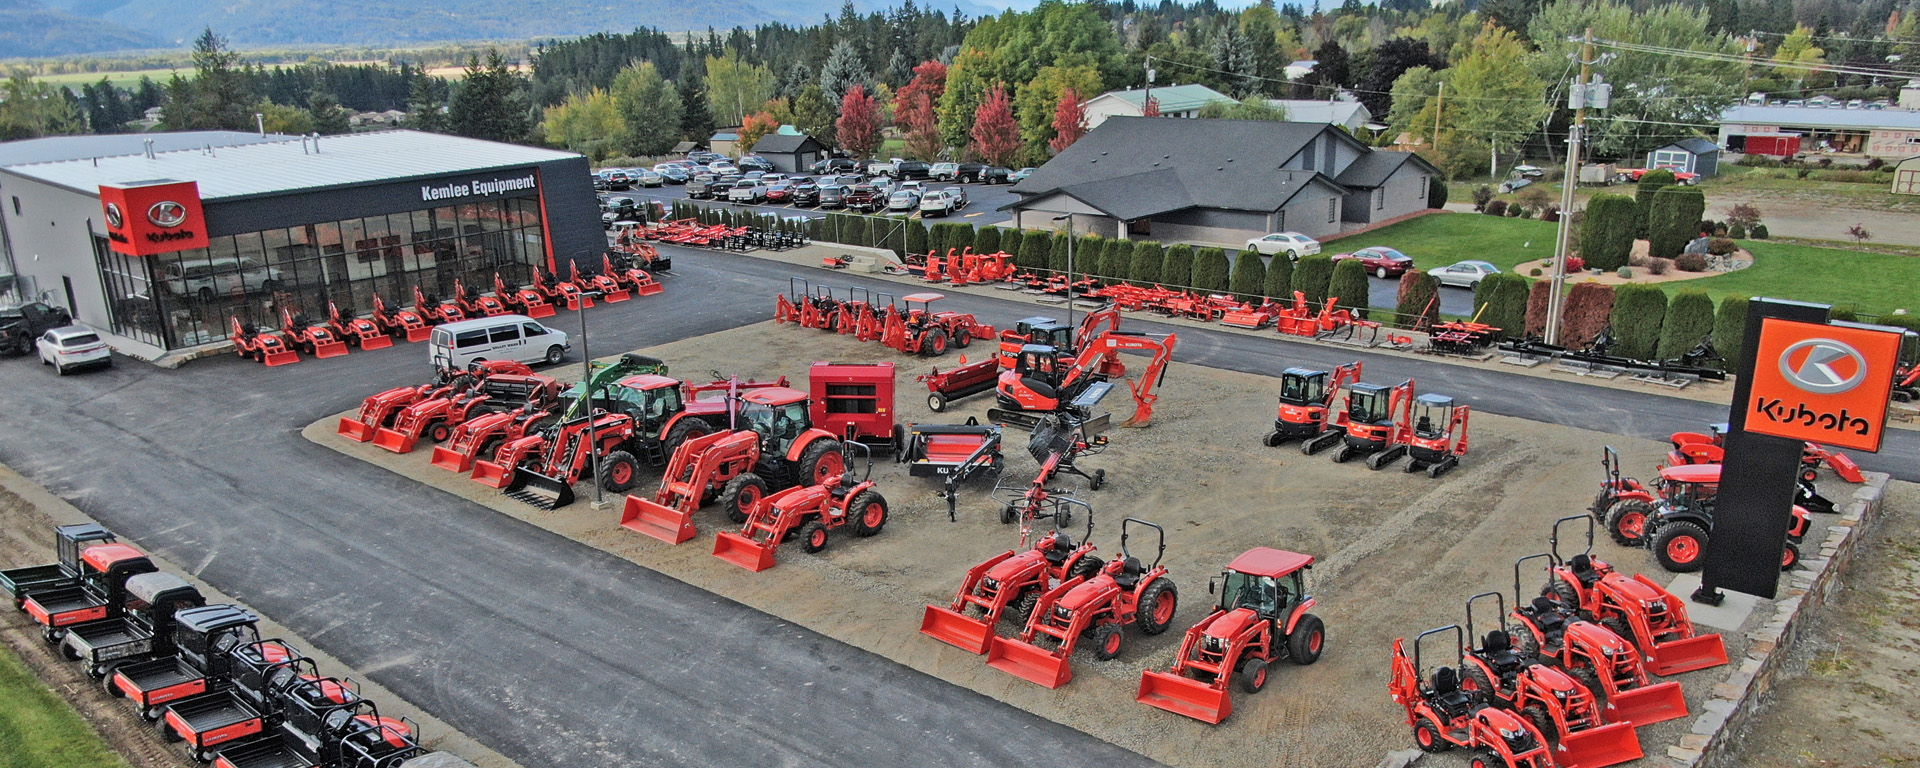 Red tractors parked outside by an exterior sign advertising Kubota 